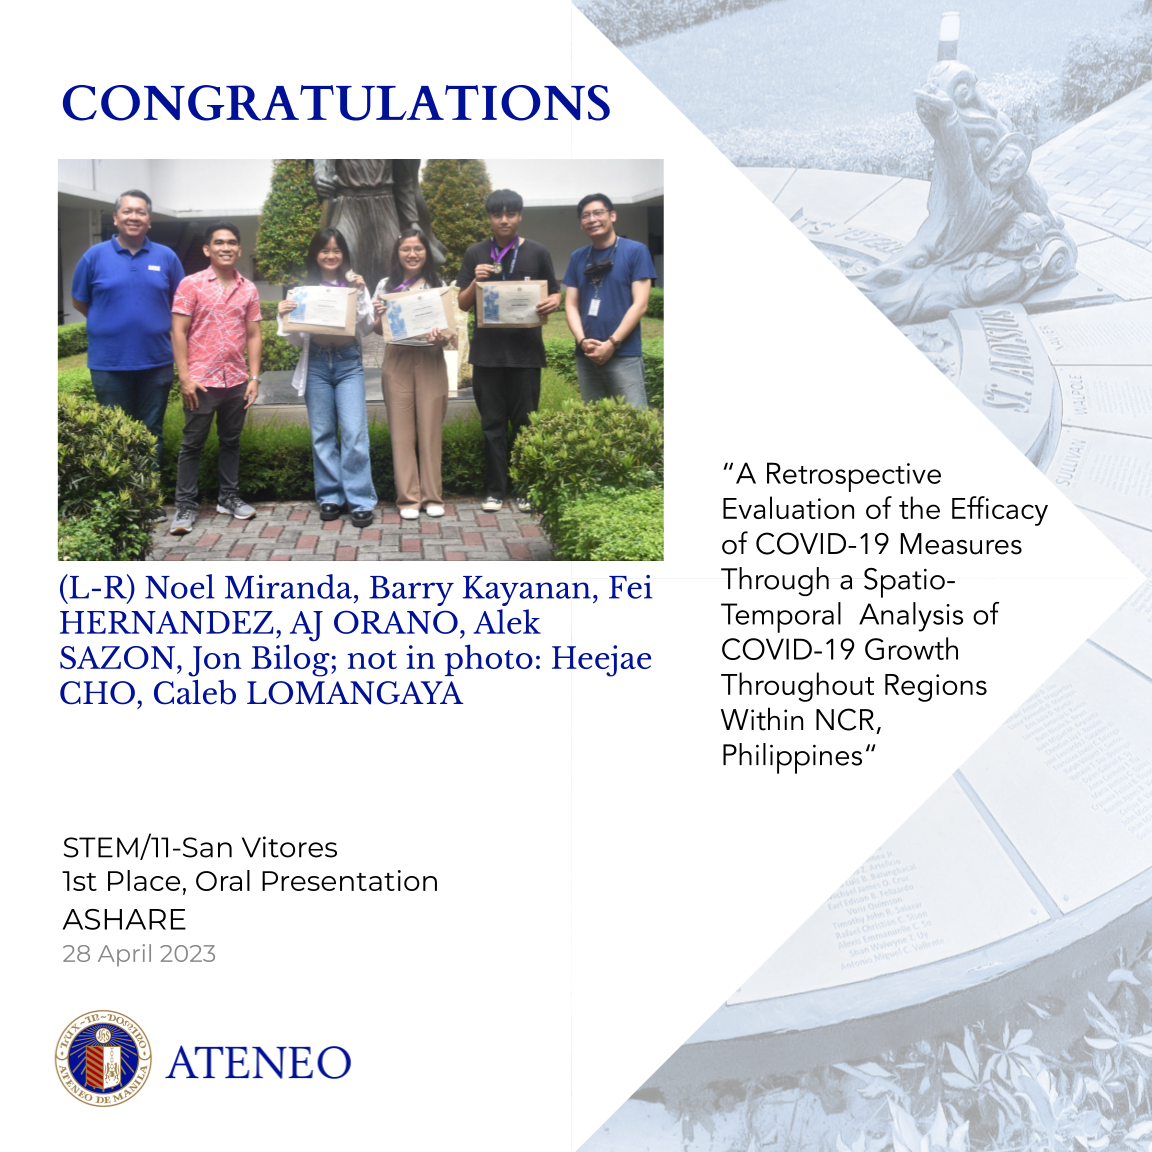 “A Retrospective Evaluation of the Efficacy of COVID-19 Measures through a Spatio-Temporal Analysis of COVID-19 Growth throughout Regions within NCR, Philippines" by Cho, Hernandez, Lomangaya, Orano, and Sazon